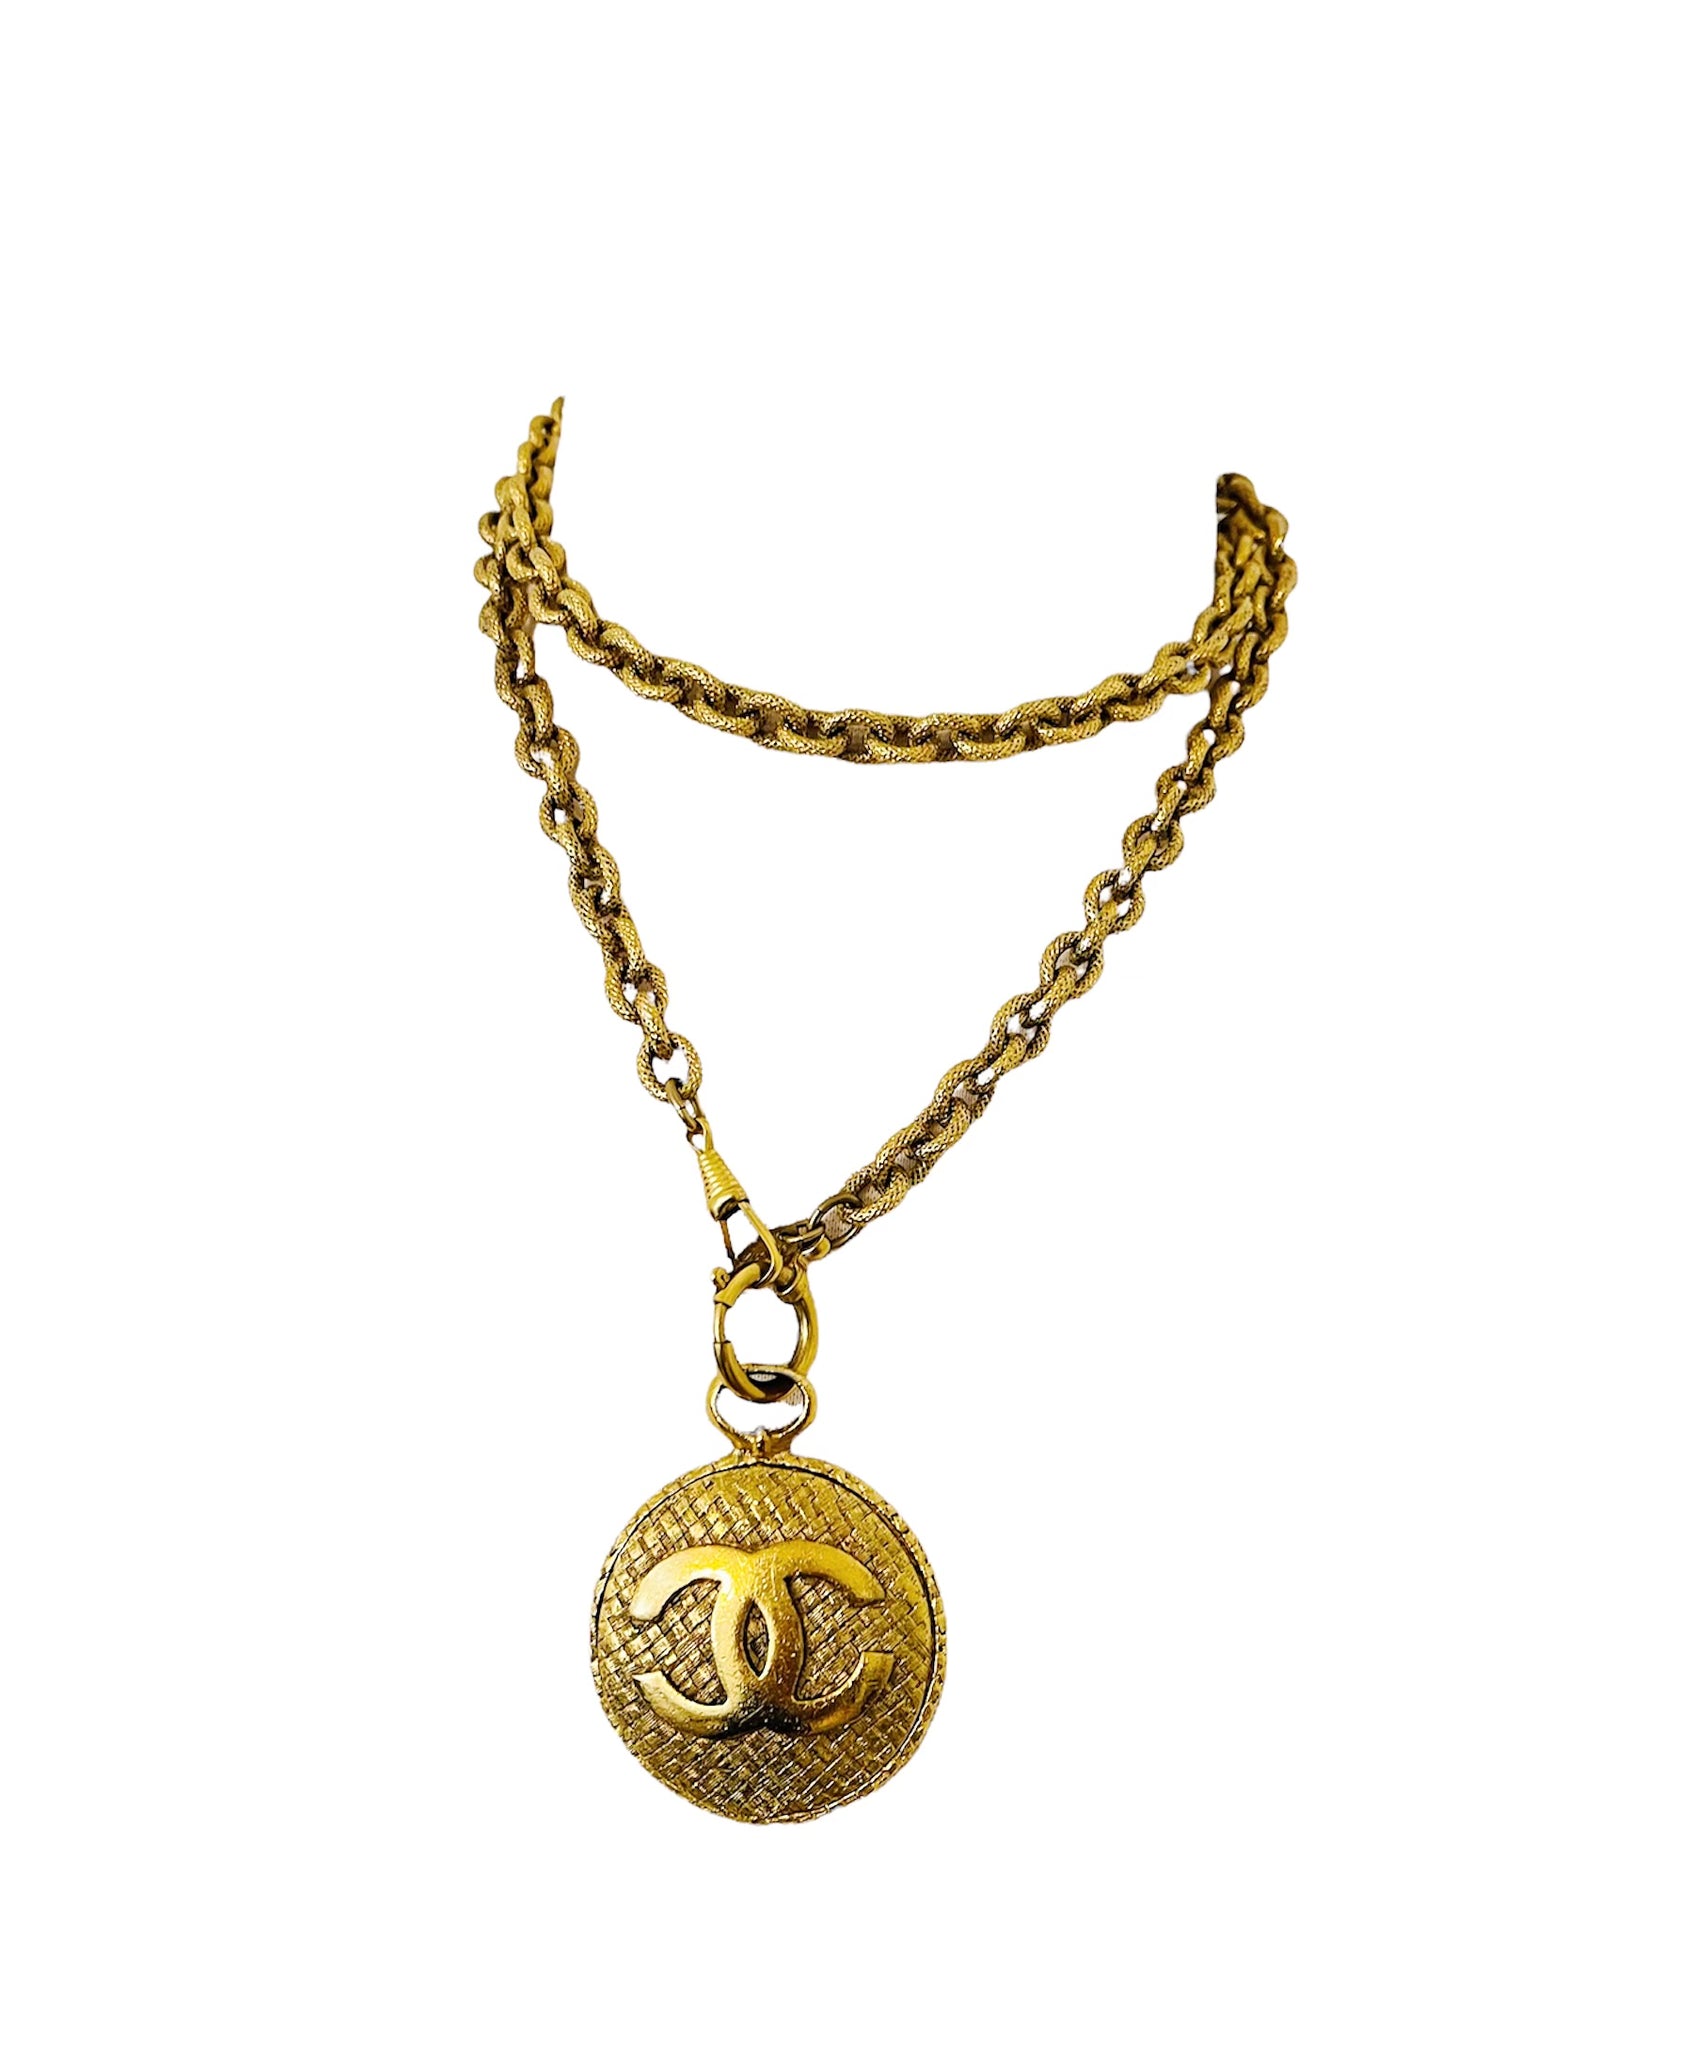 Only 46000 usd for Vintage Chanel Necklace 1980s Rue Cambon Pendant Online  at the Shop